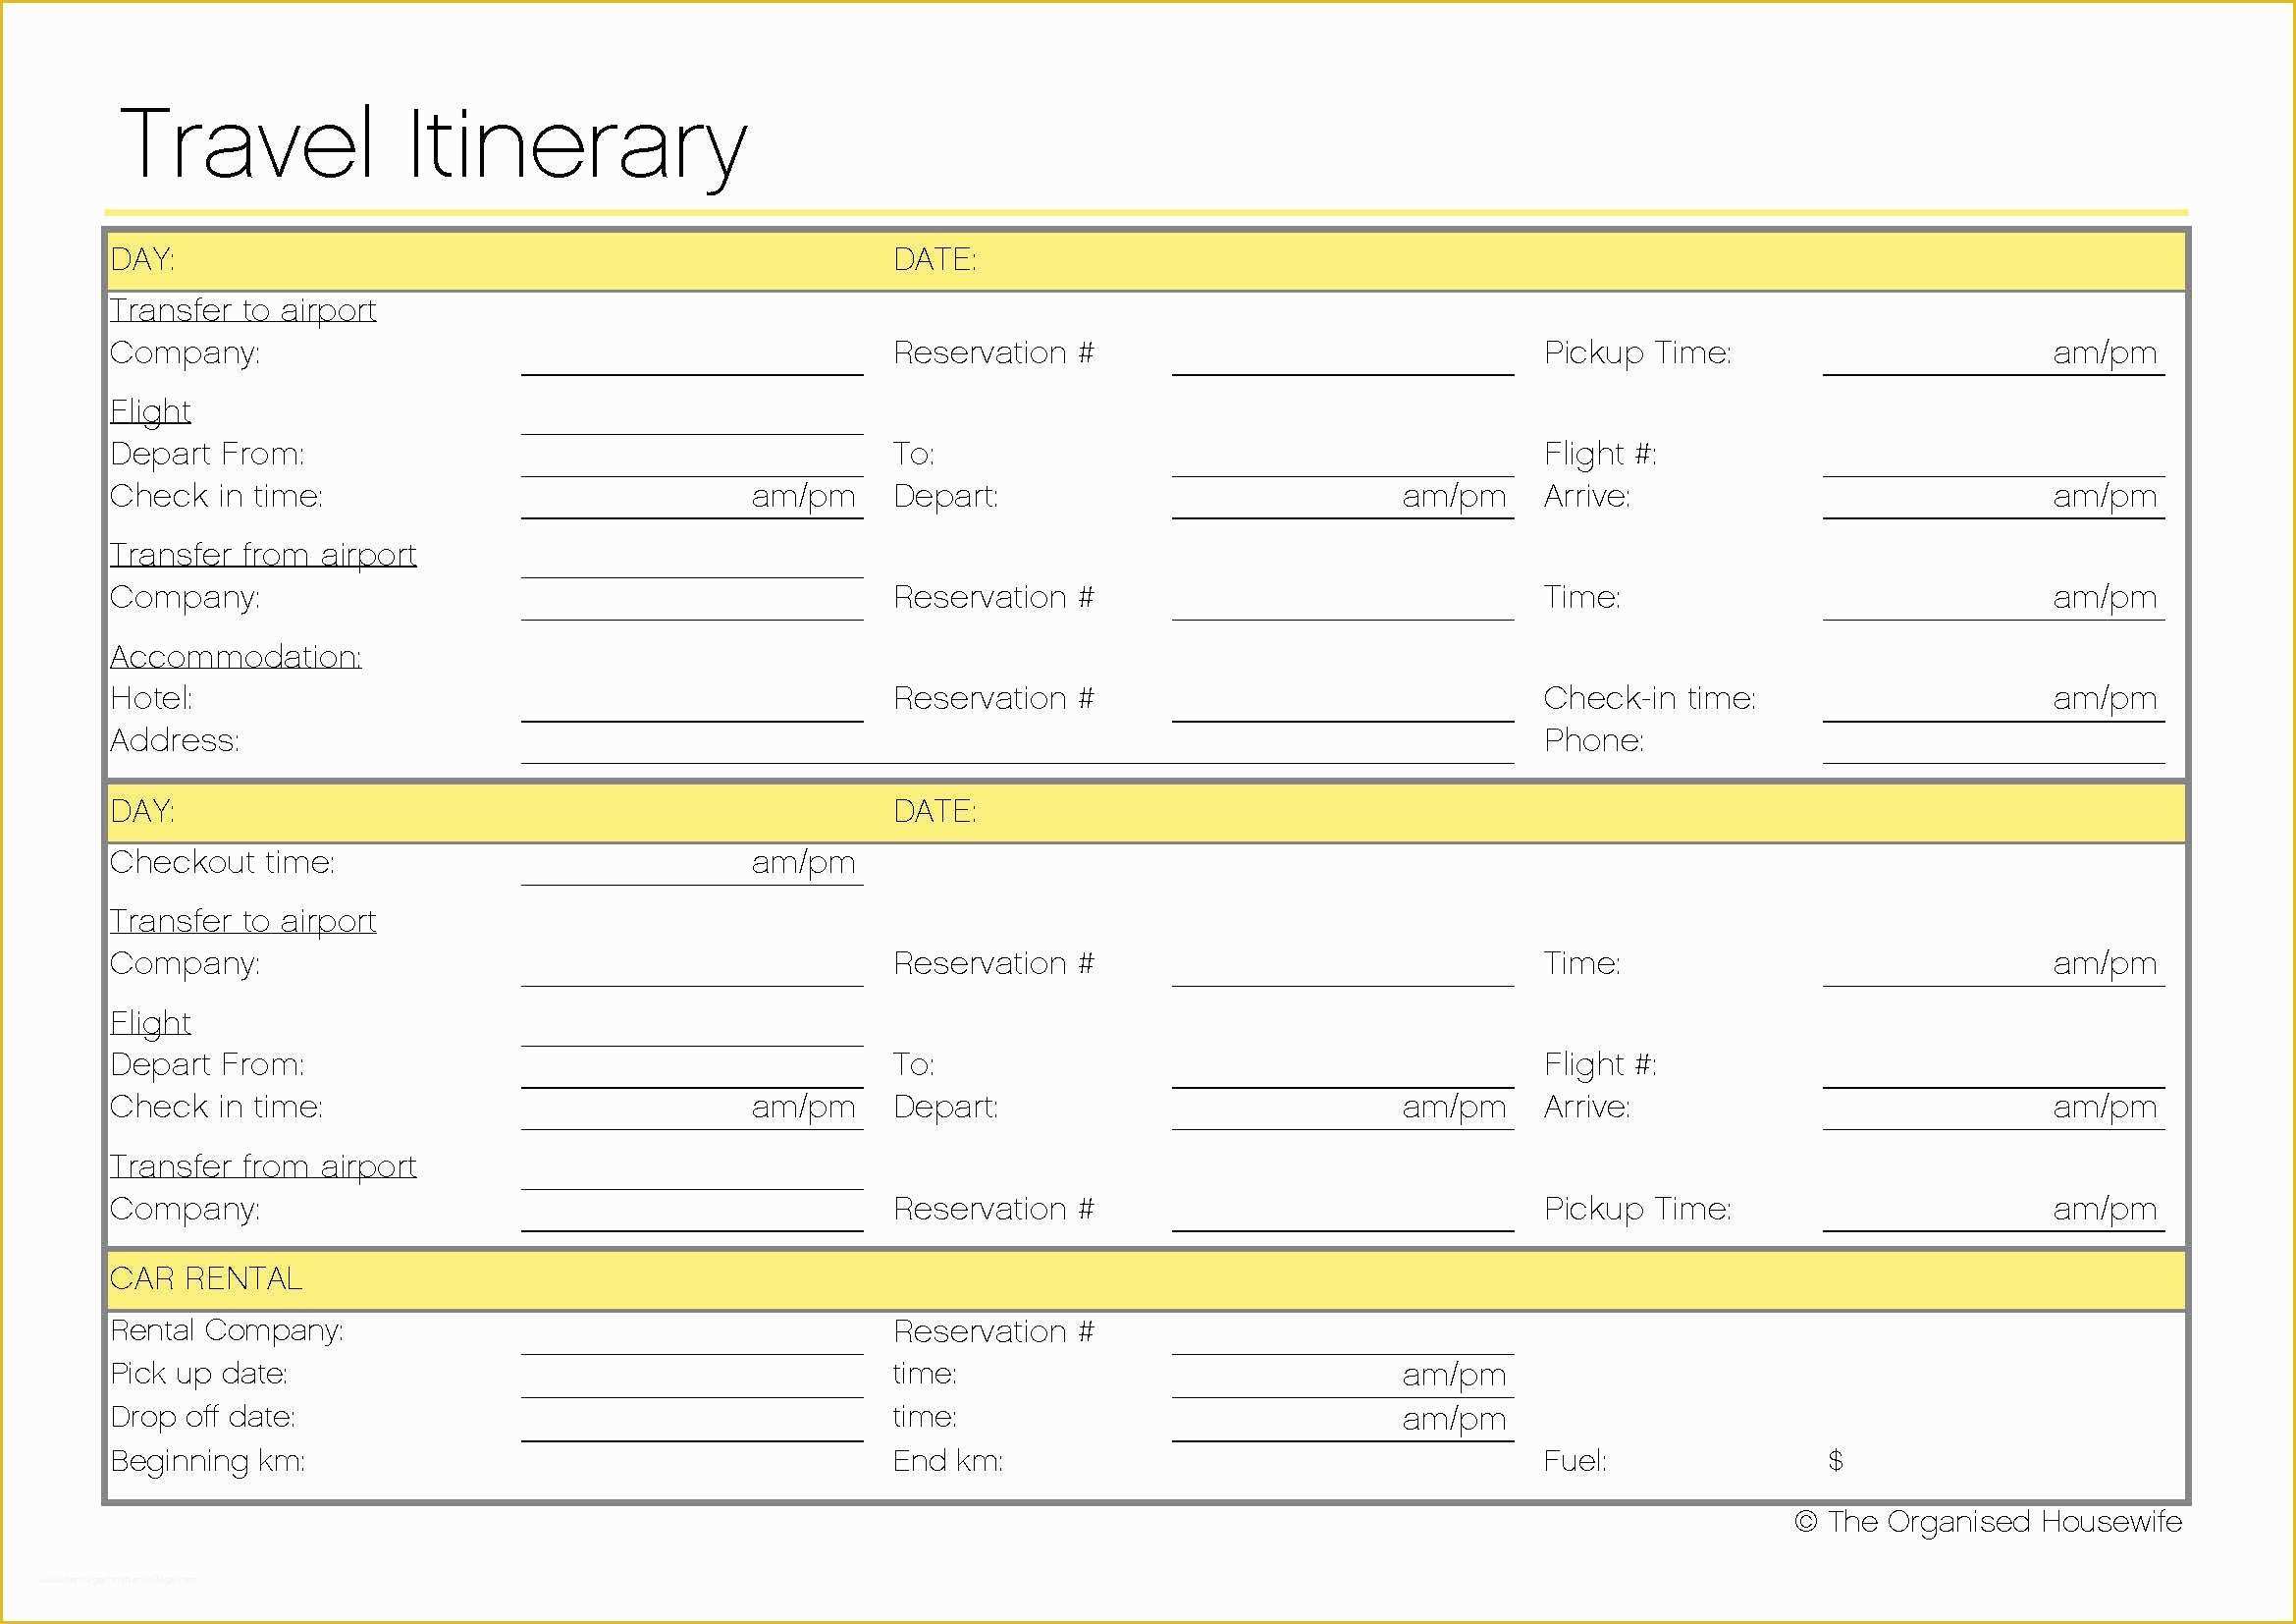 Free Travel Itinerary Planner Template Of Free Printable Travel Itinerary the organised Housewife